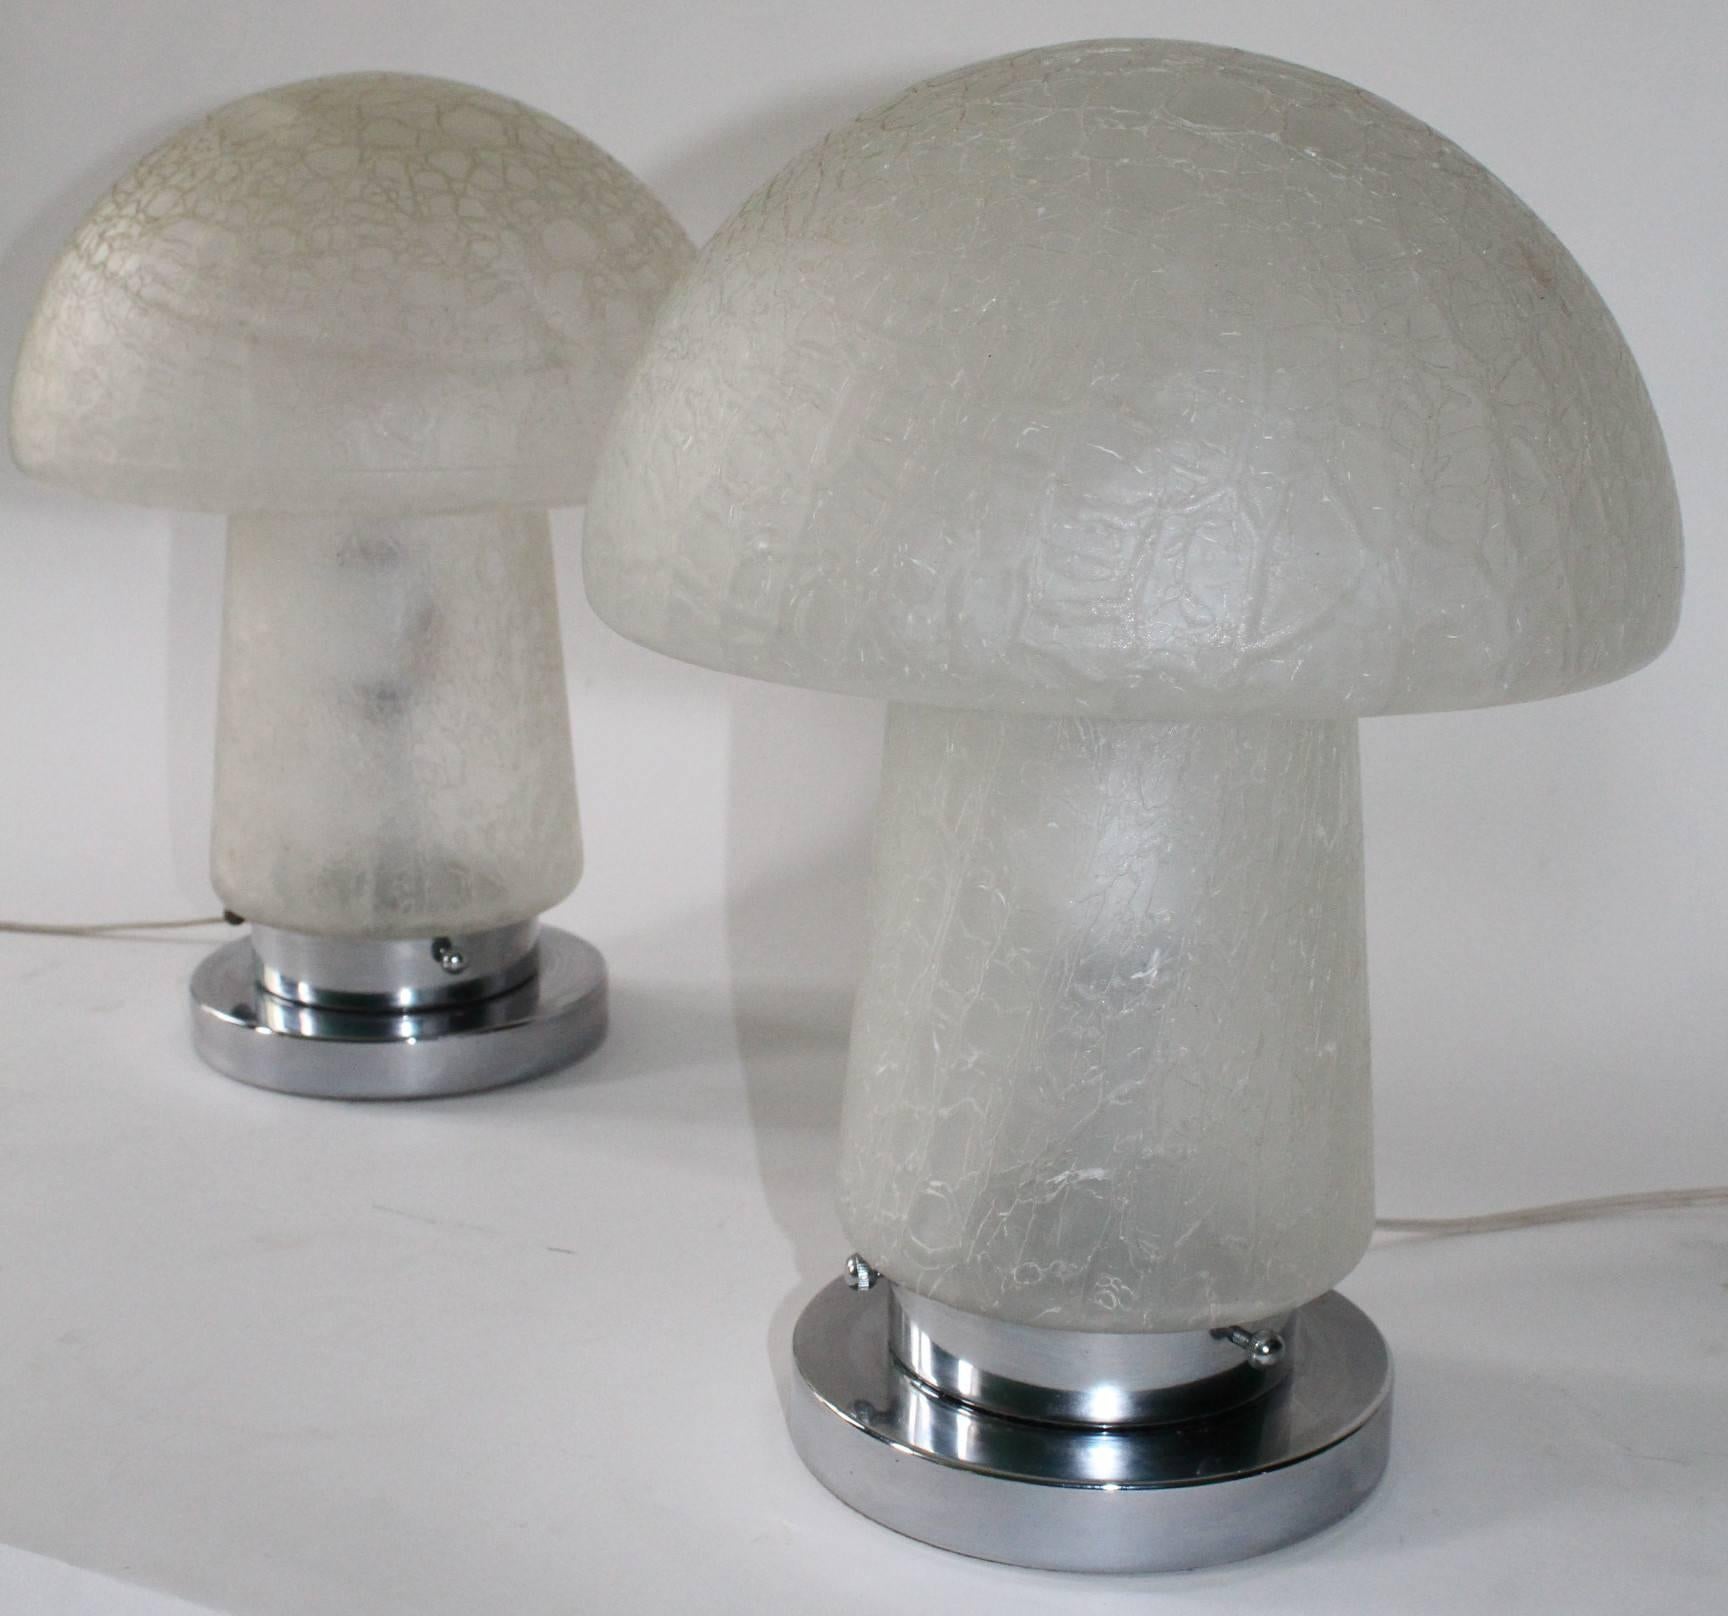 These crackle murano glass mushroom shade lamps from circa 1970 are mounted on polished chrome bases. There is a visible bulge line across one of the lamps on the top which is a natural occurrence sometimes that happens during the blowing